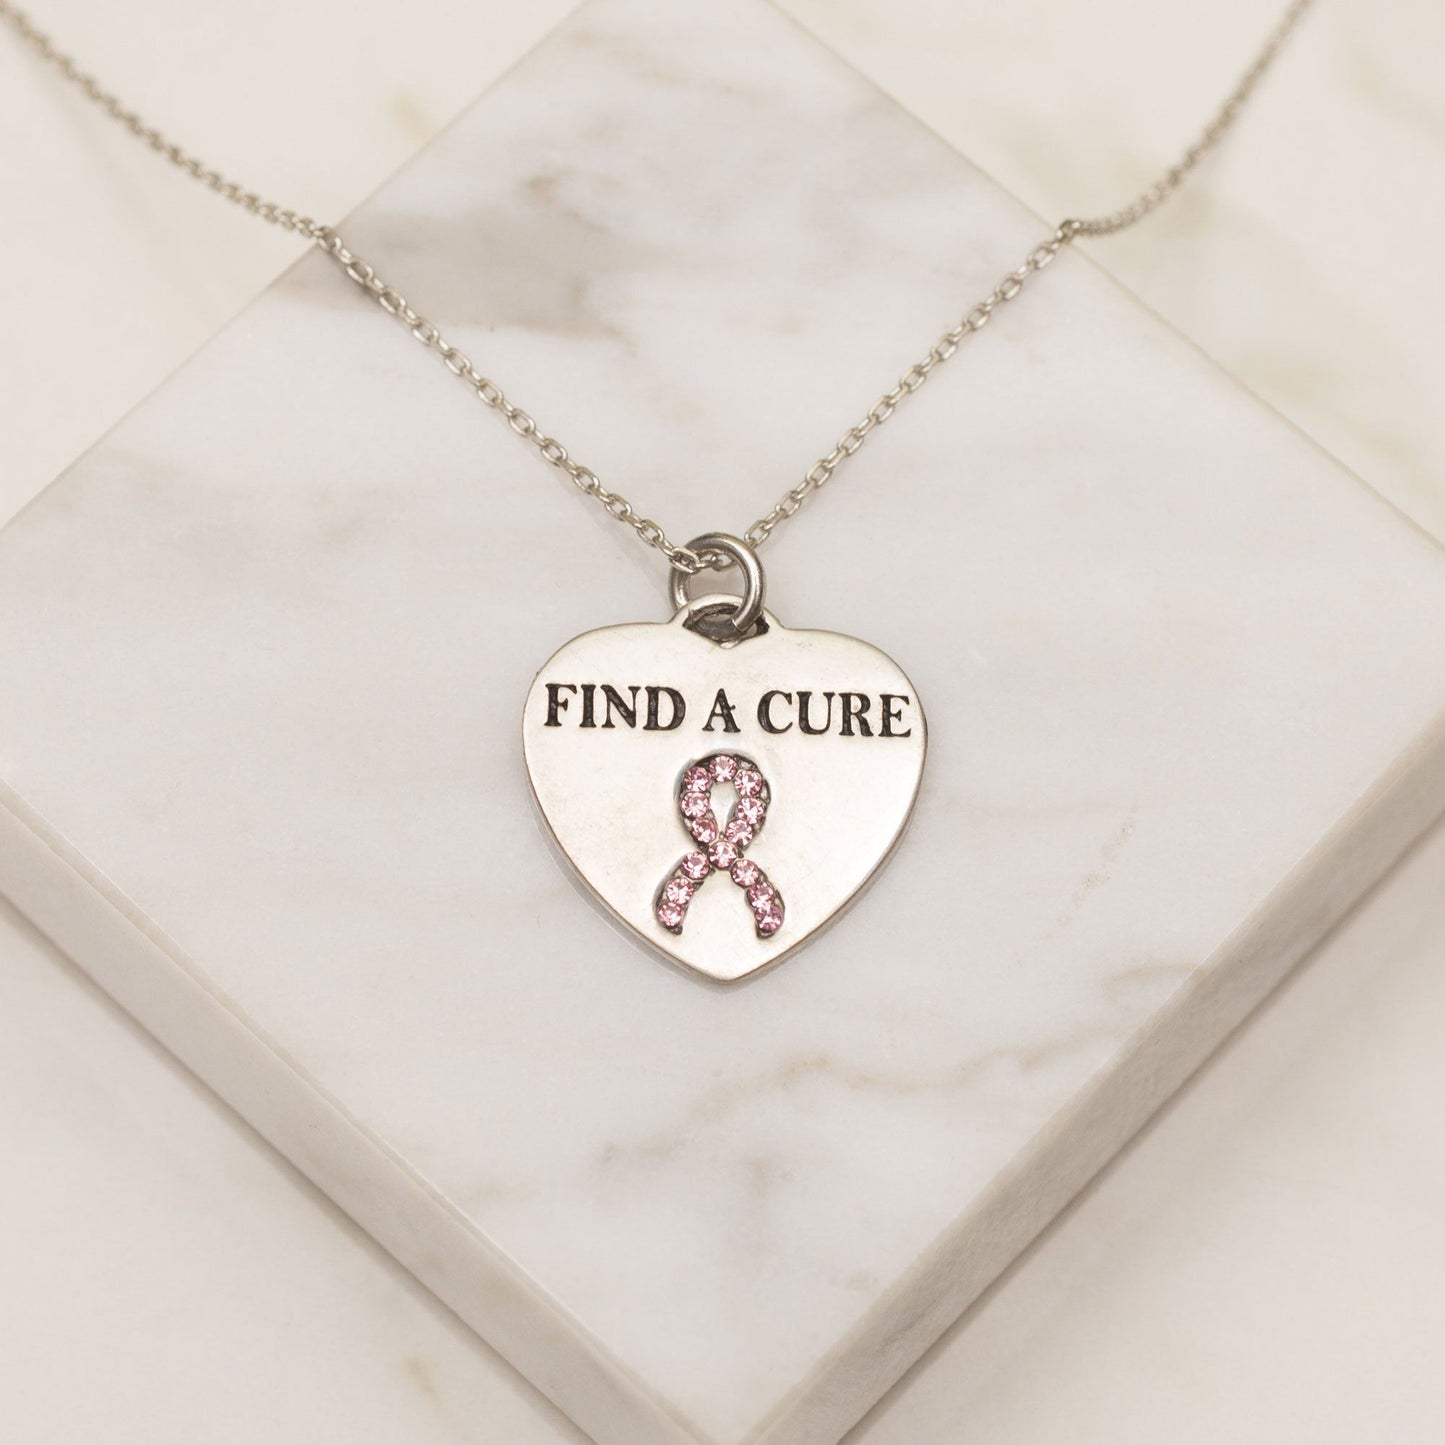 Cure In Your Heart Pewter Necklace!